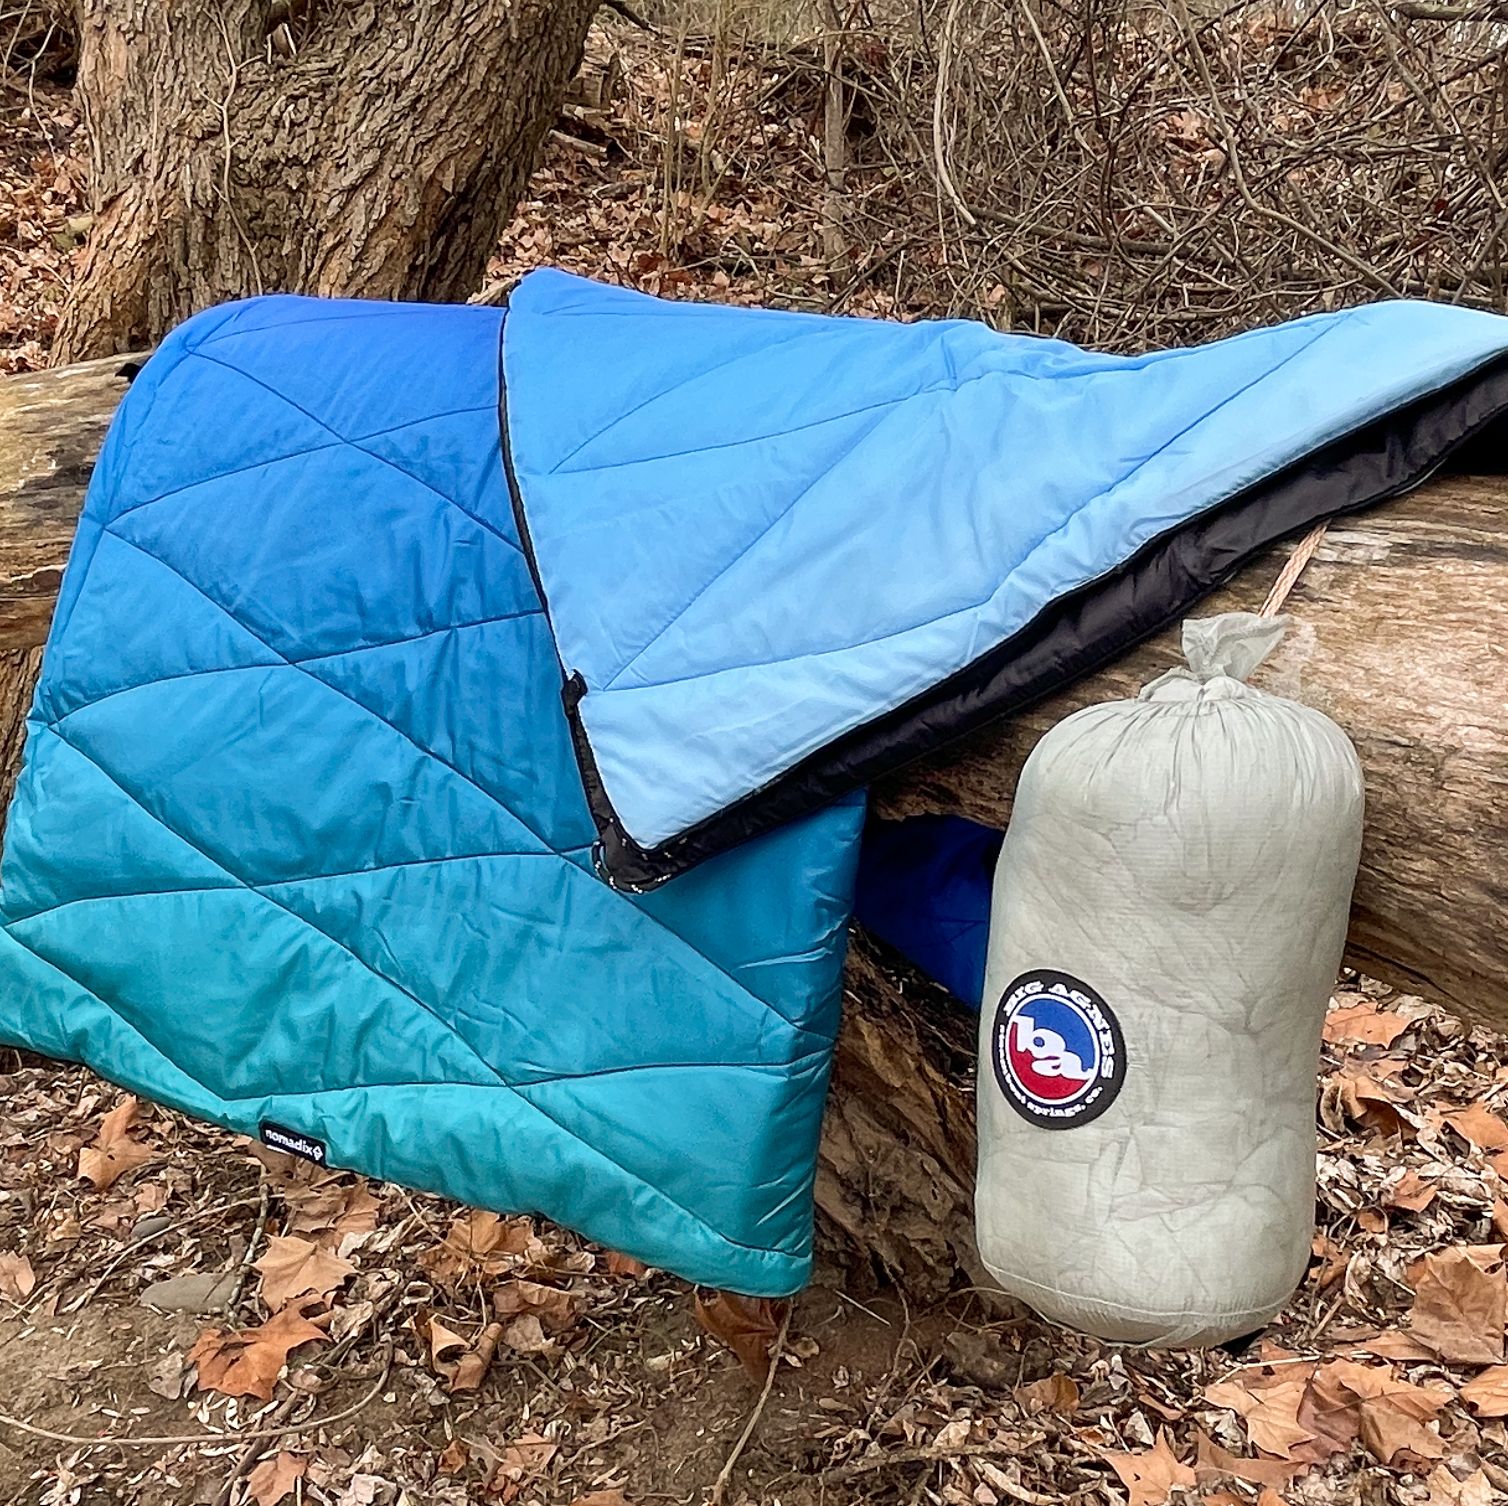 Save Weight in Your Pack With These Ultralight Sleeping Bags for Thru-Hiking, Bikepacking, and Camping